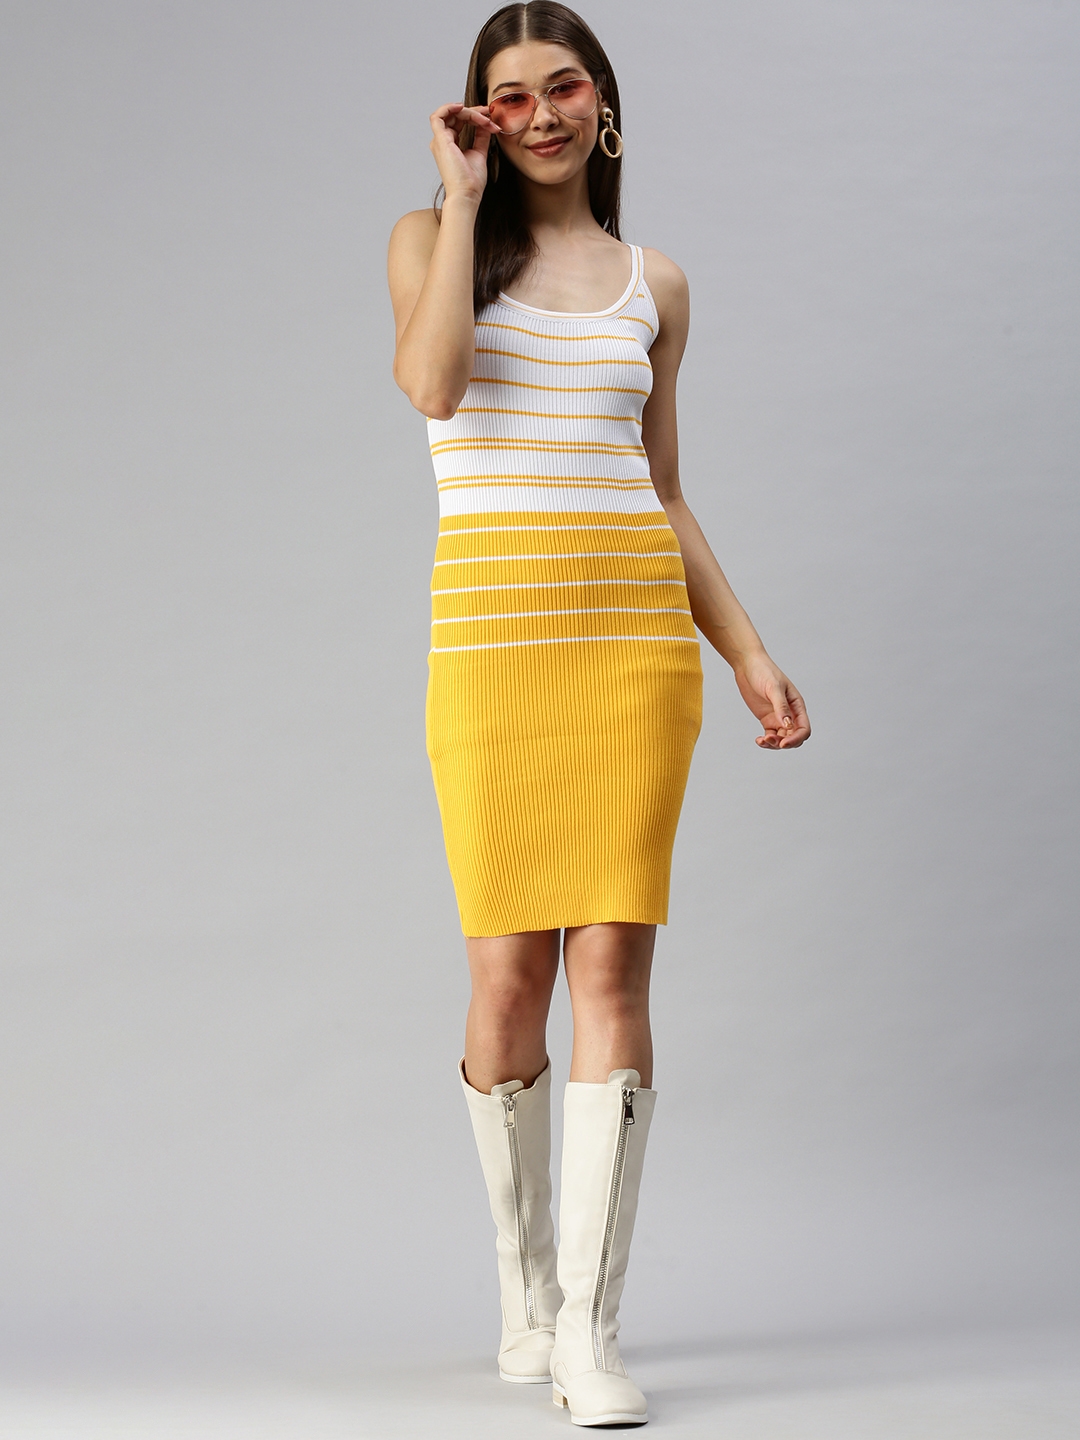 Showoff | SHOWOFF Women Yellow Striped Shoulder Straps Sleeveless Above Knee Bodycon Dress 3